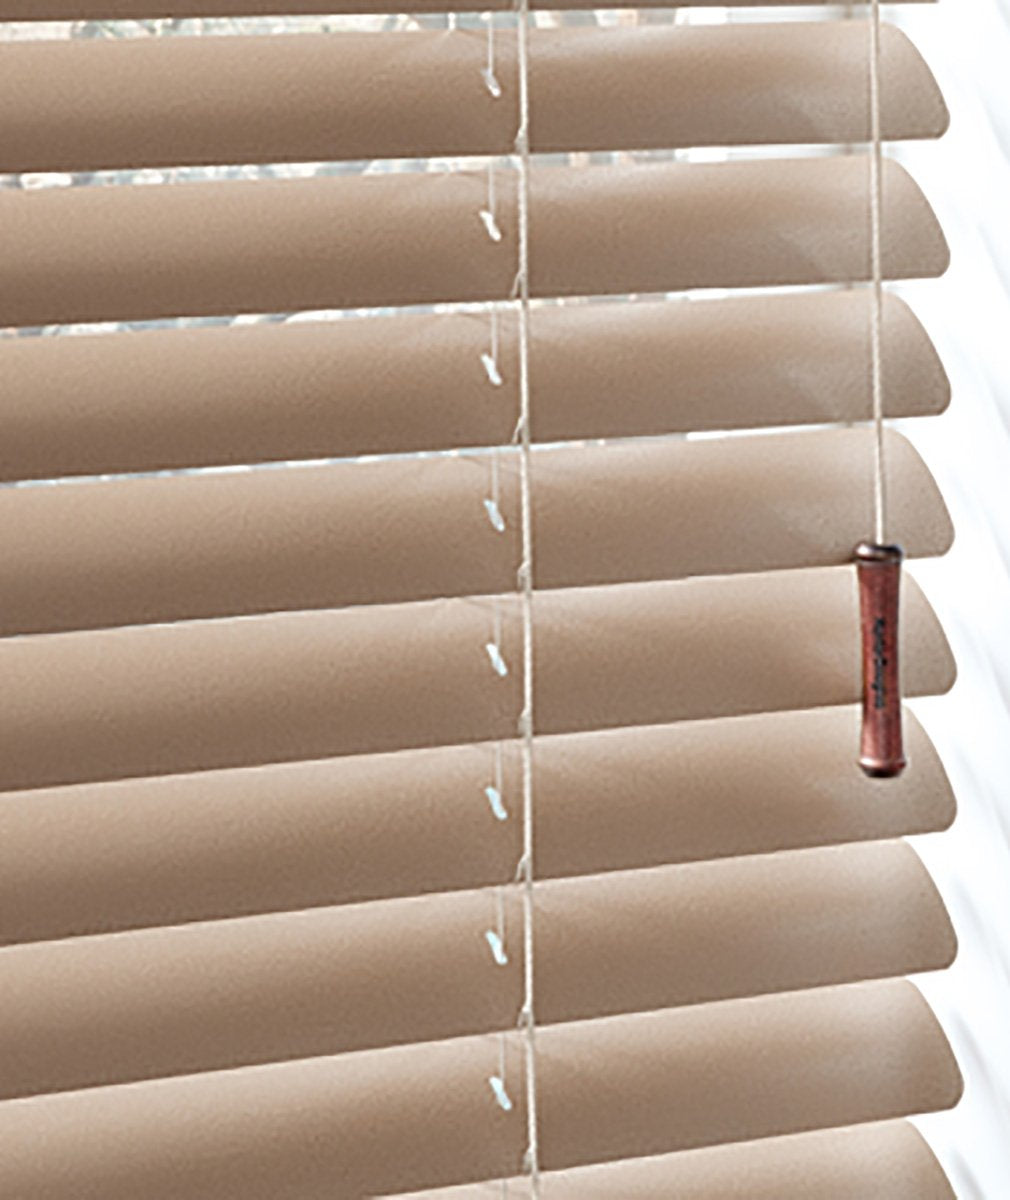 Hunter Douglas Window Treatments Natural Elements close-up. Available at JC Licht in Chicago